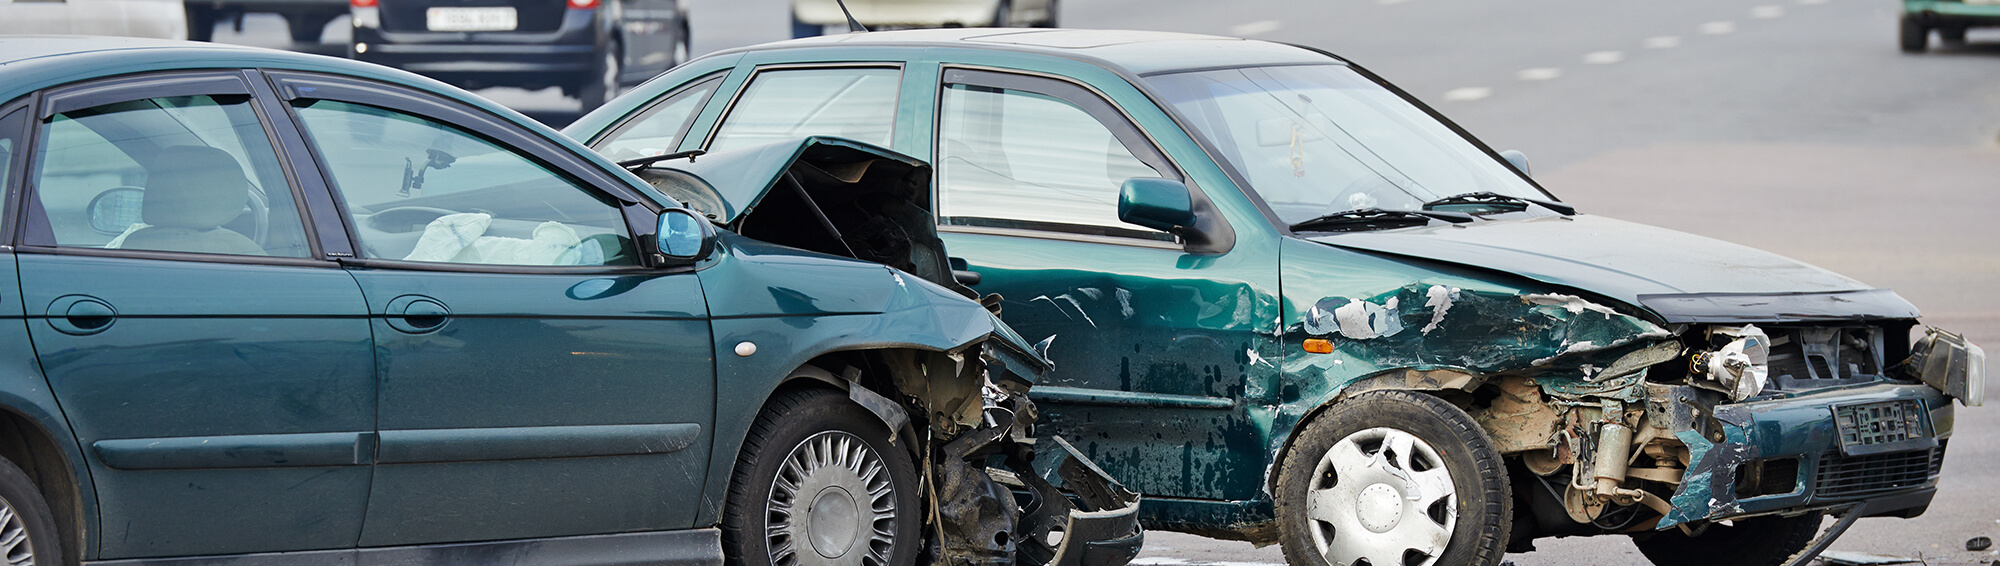 3 Phone Calls to Make After an Auto Accident